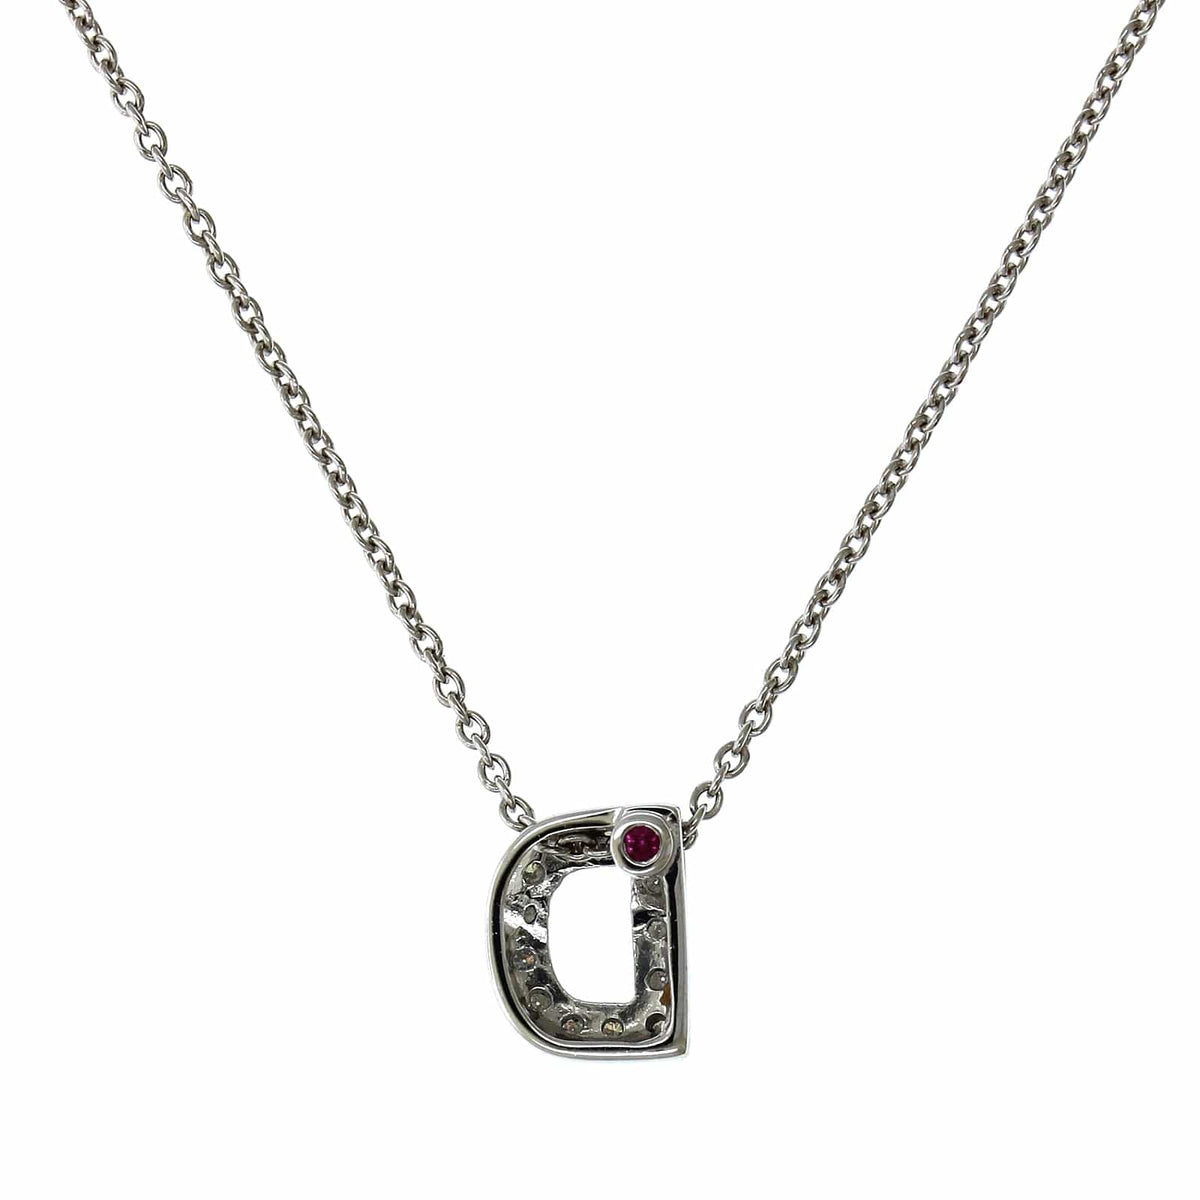 Roberto Coin 18K White Gold "D" Initial Diamond Necklace